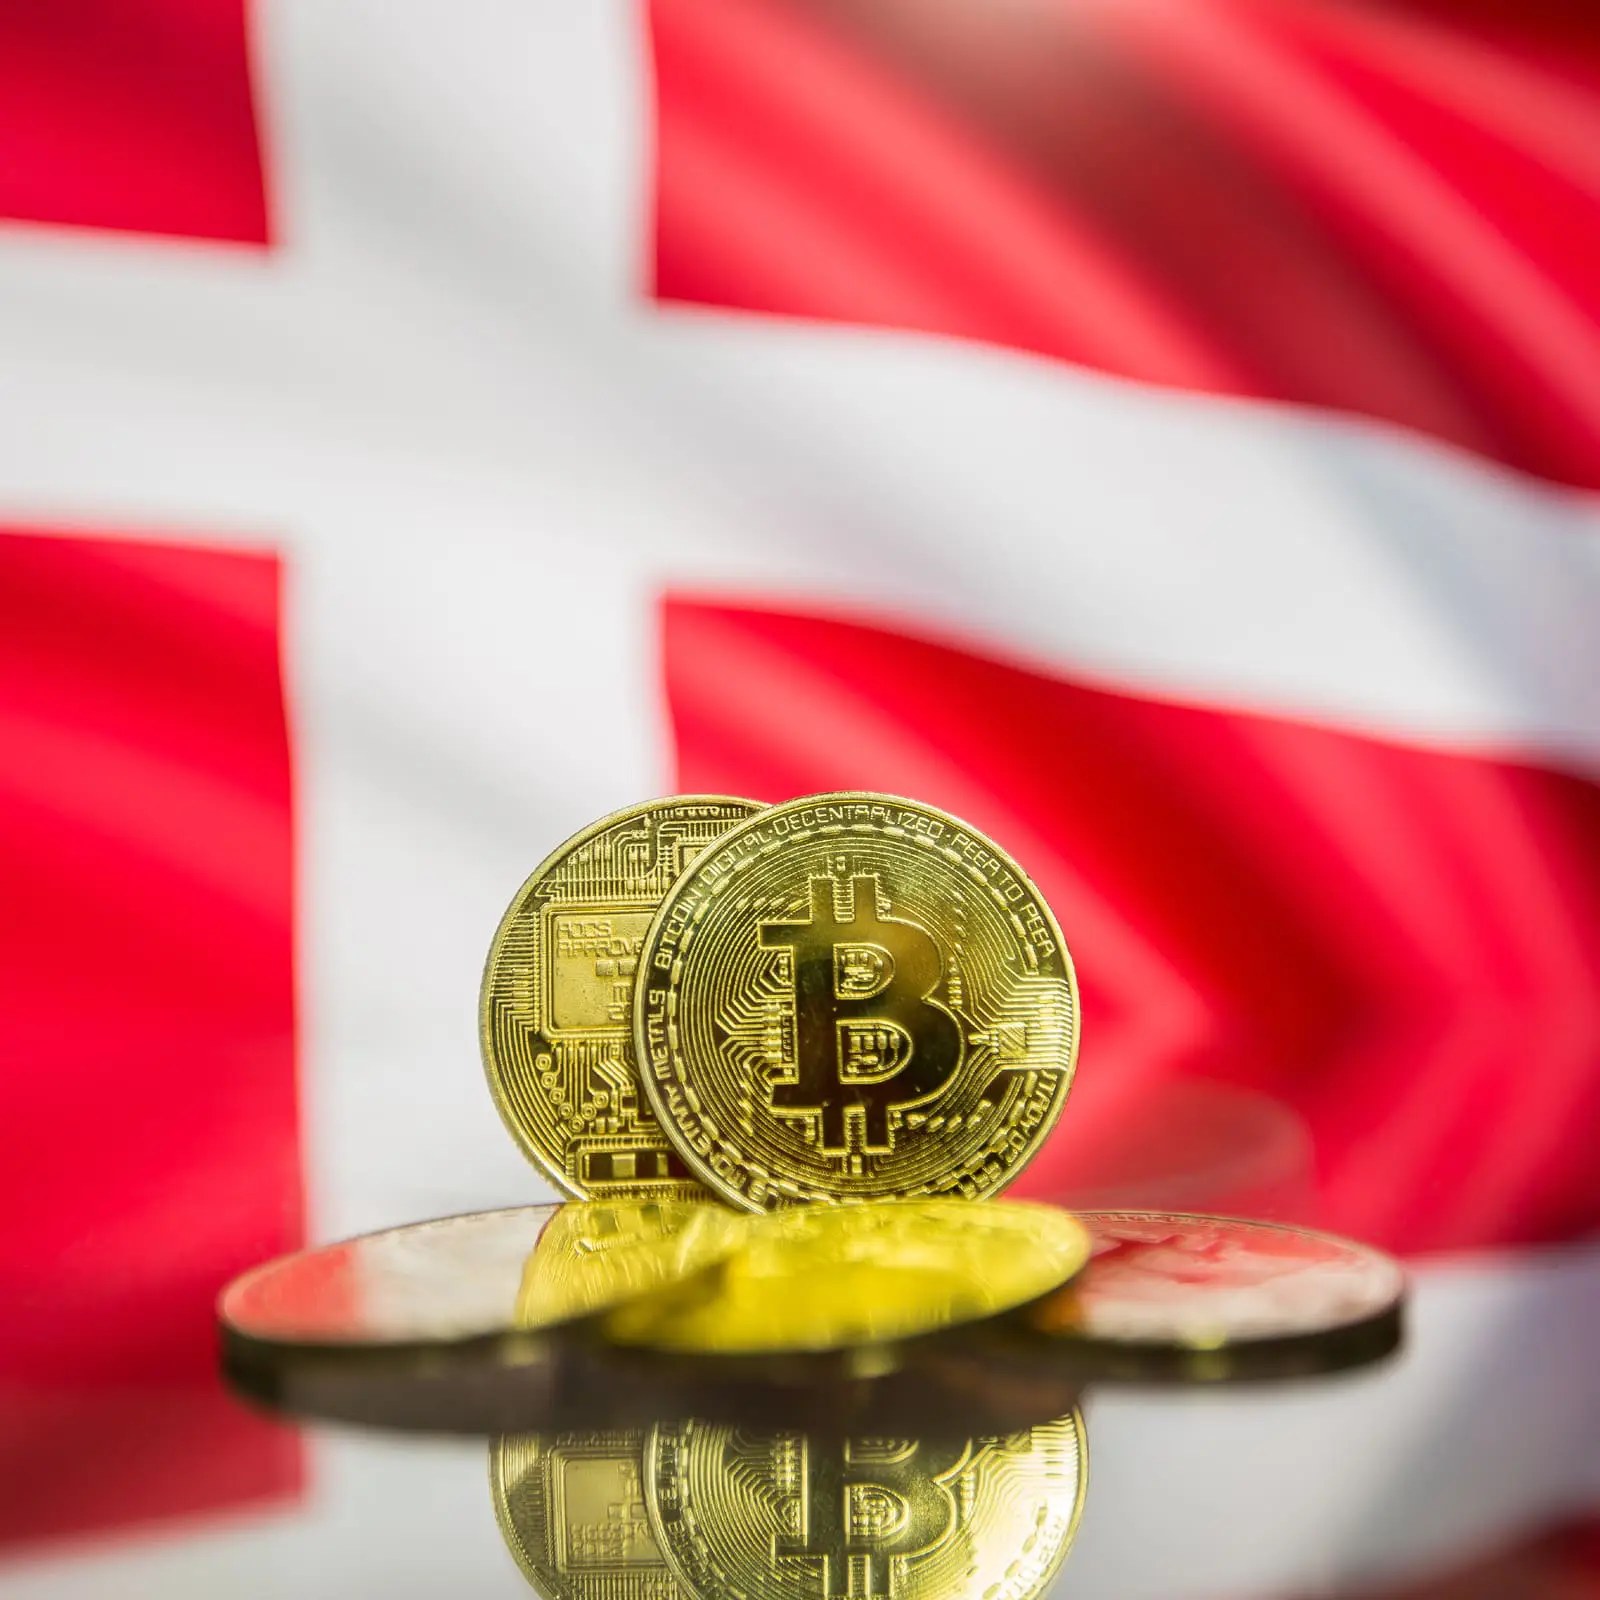 Denmark Tax Agency to gather information about bitcoin traders from Crypto Exchanges